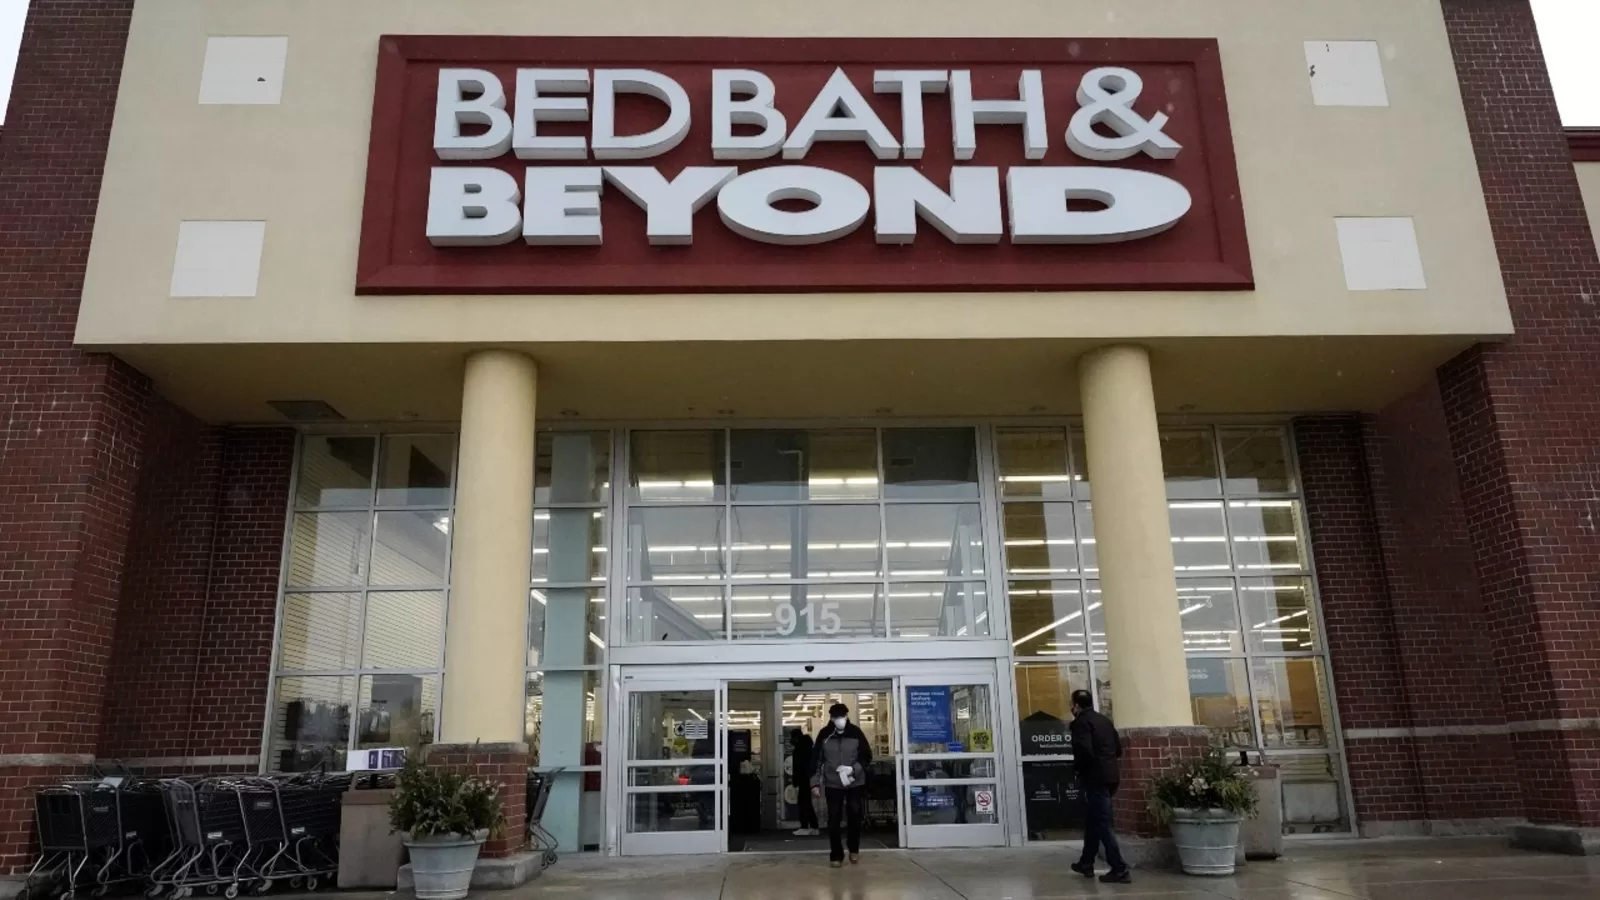 Bed Bath & Beyond stores: Company warns about bankruptcy as sales slump